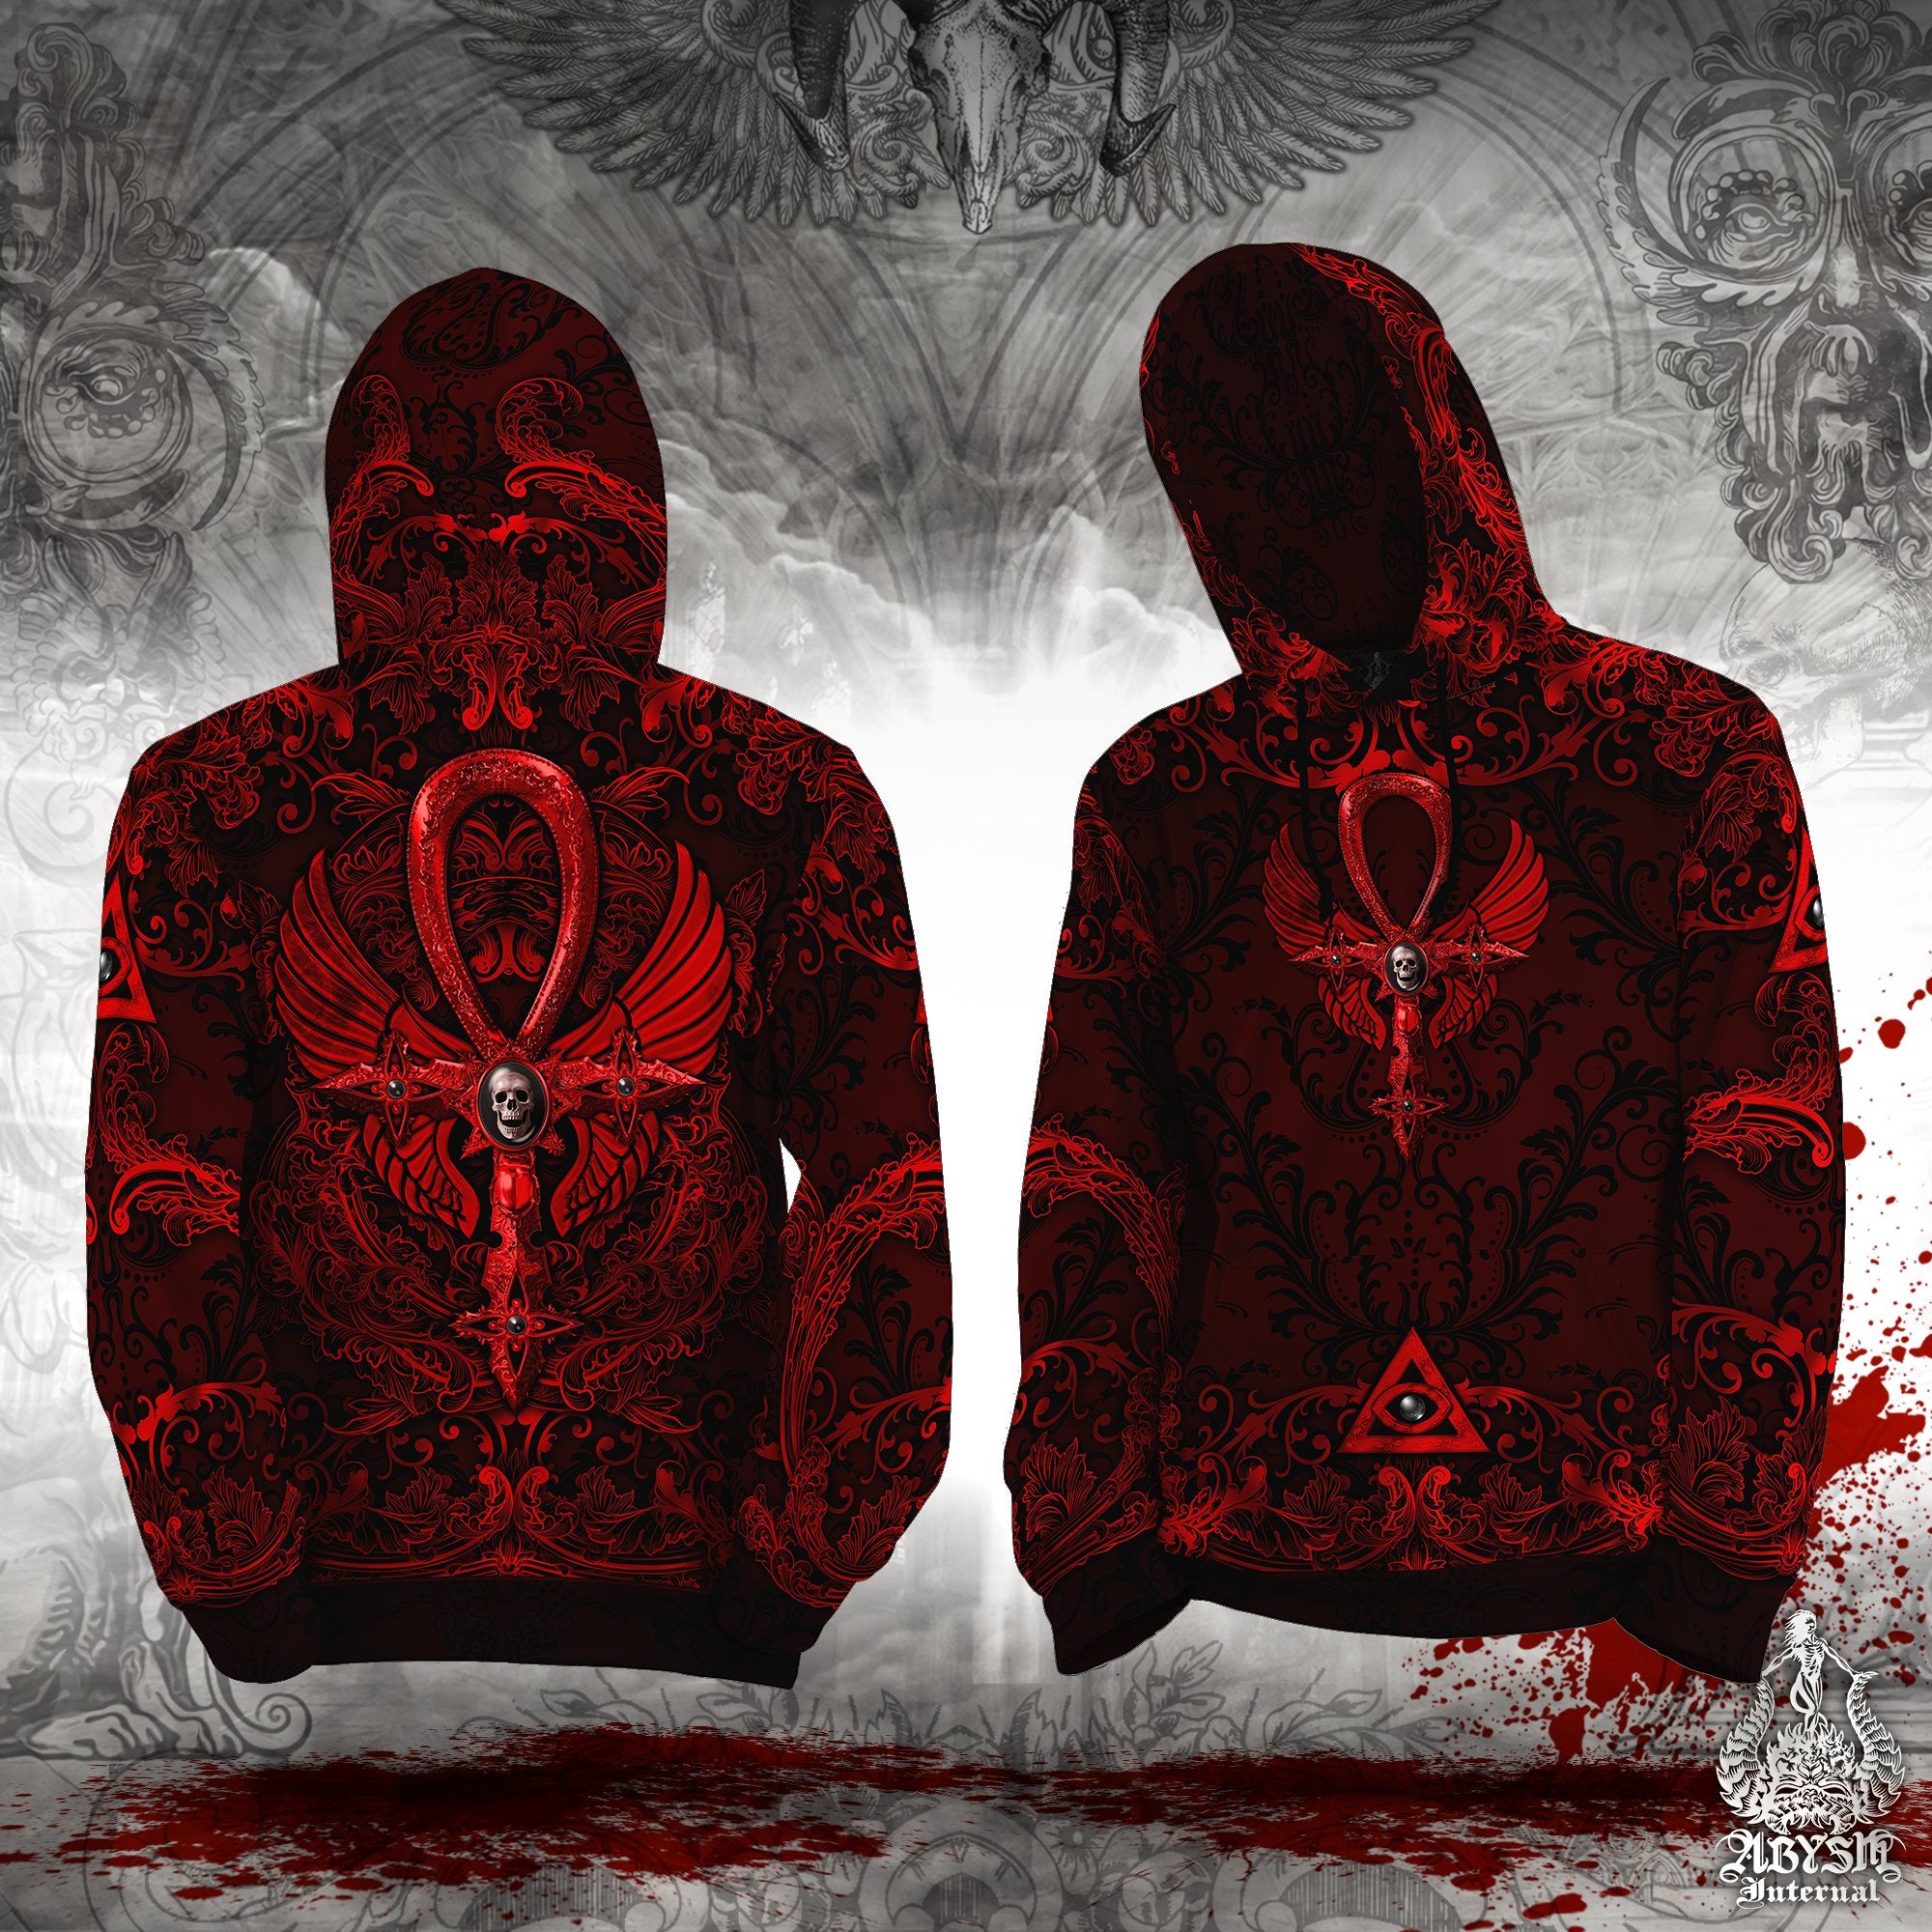 Gothic Pullover, Dark Red Hoodie, Goth Streetwear, Bloody Ankh Cross Sweater, Alternative Clothing, Unisex - Black, Gold, 3 Colors - Abysm Internal